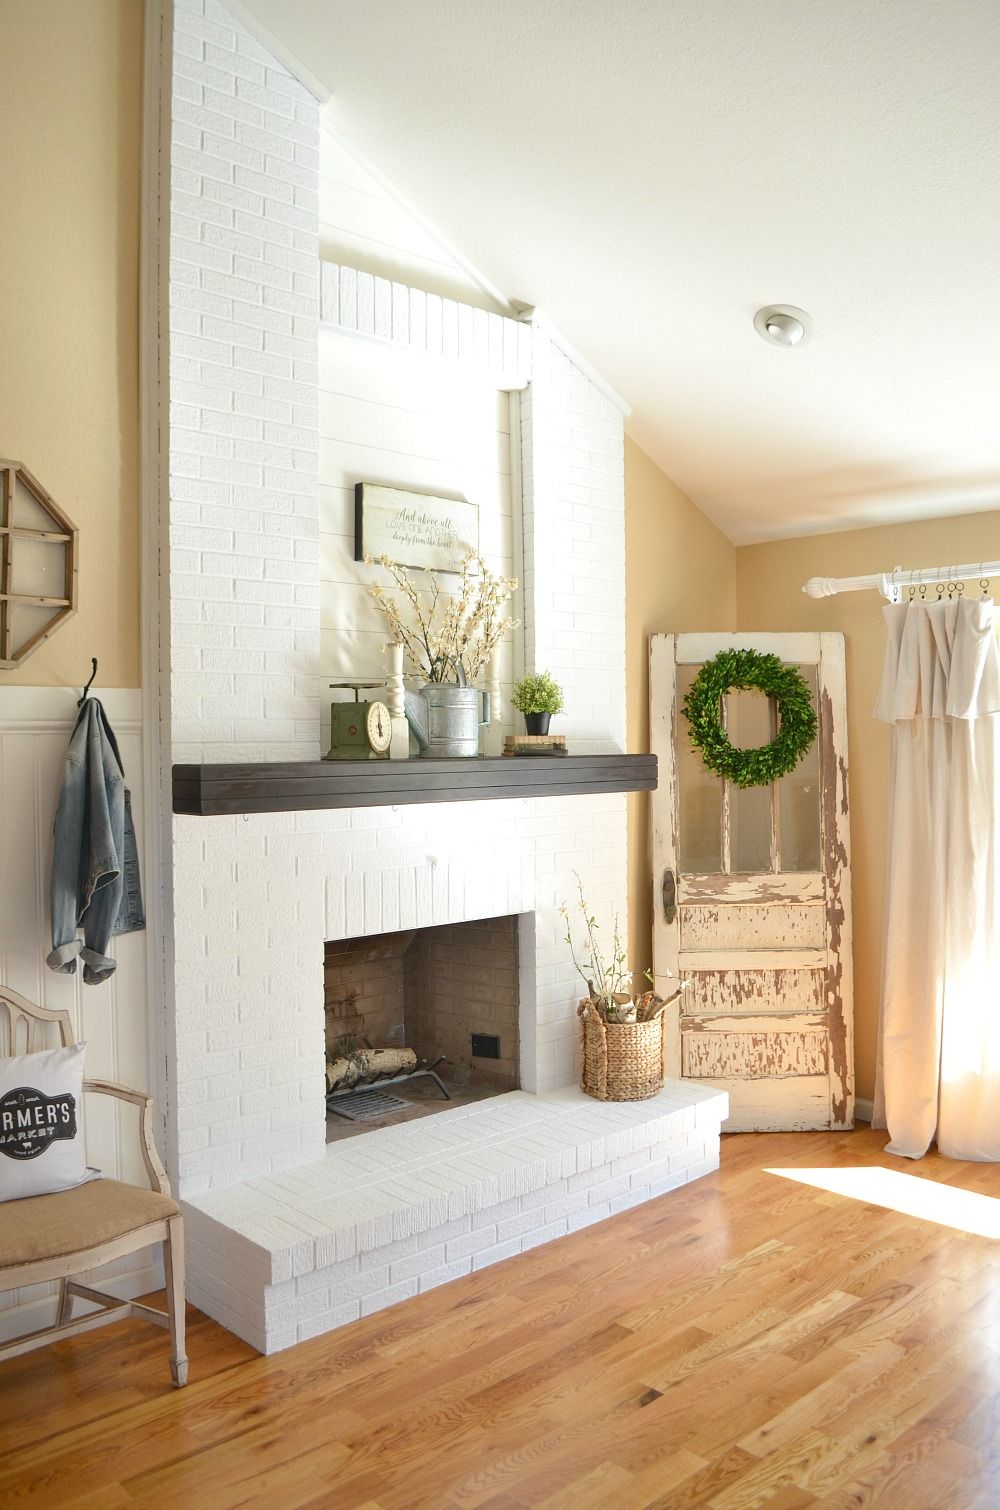 How to Remove Paint From Brick Fireplace Elegant How to Paint A Brick Fireplace Fireplaces